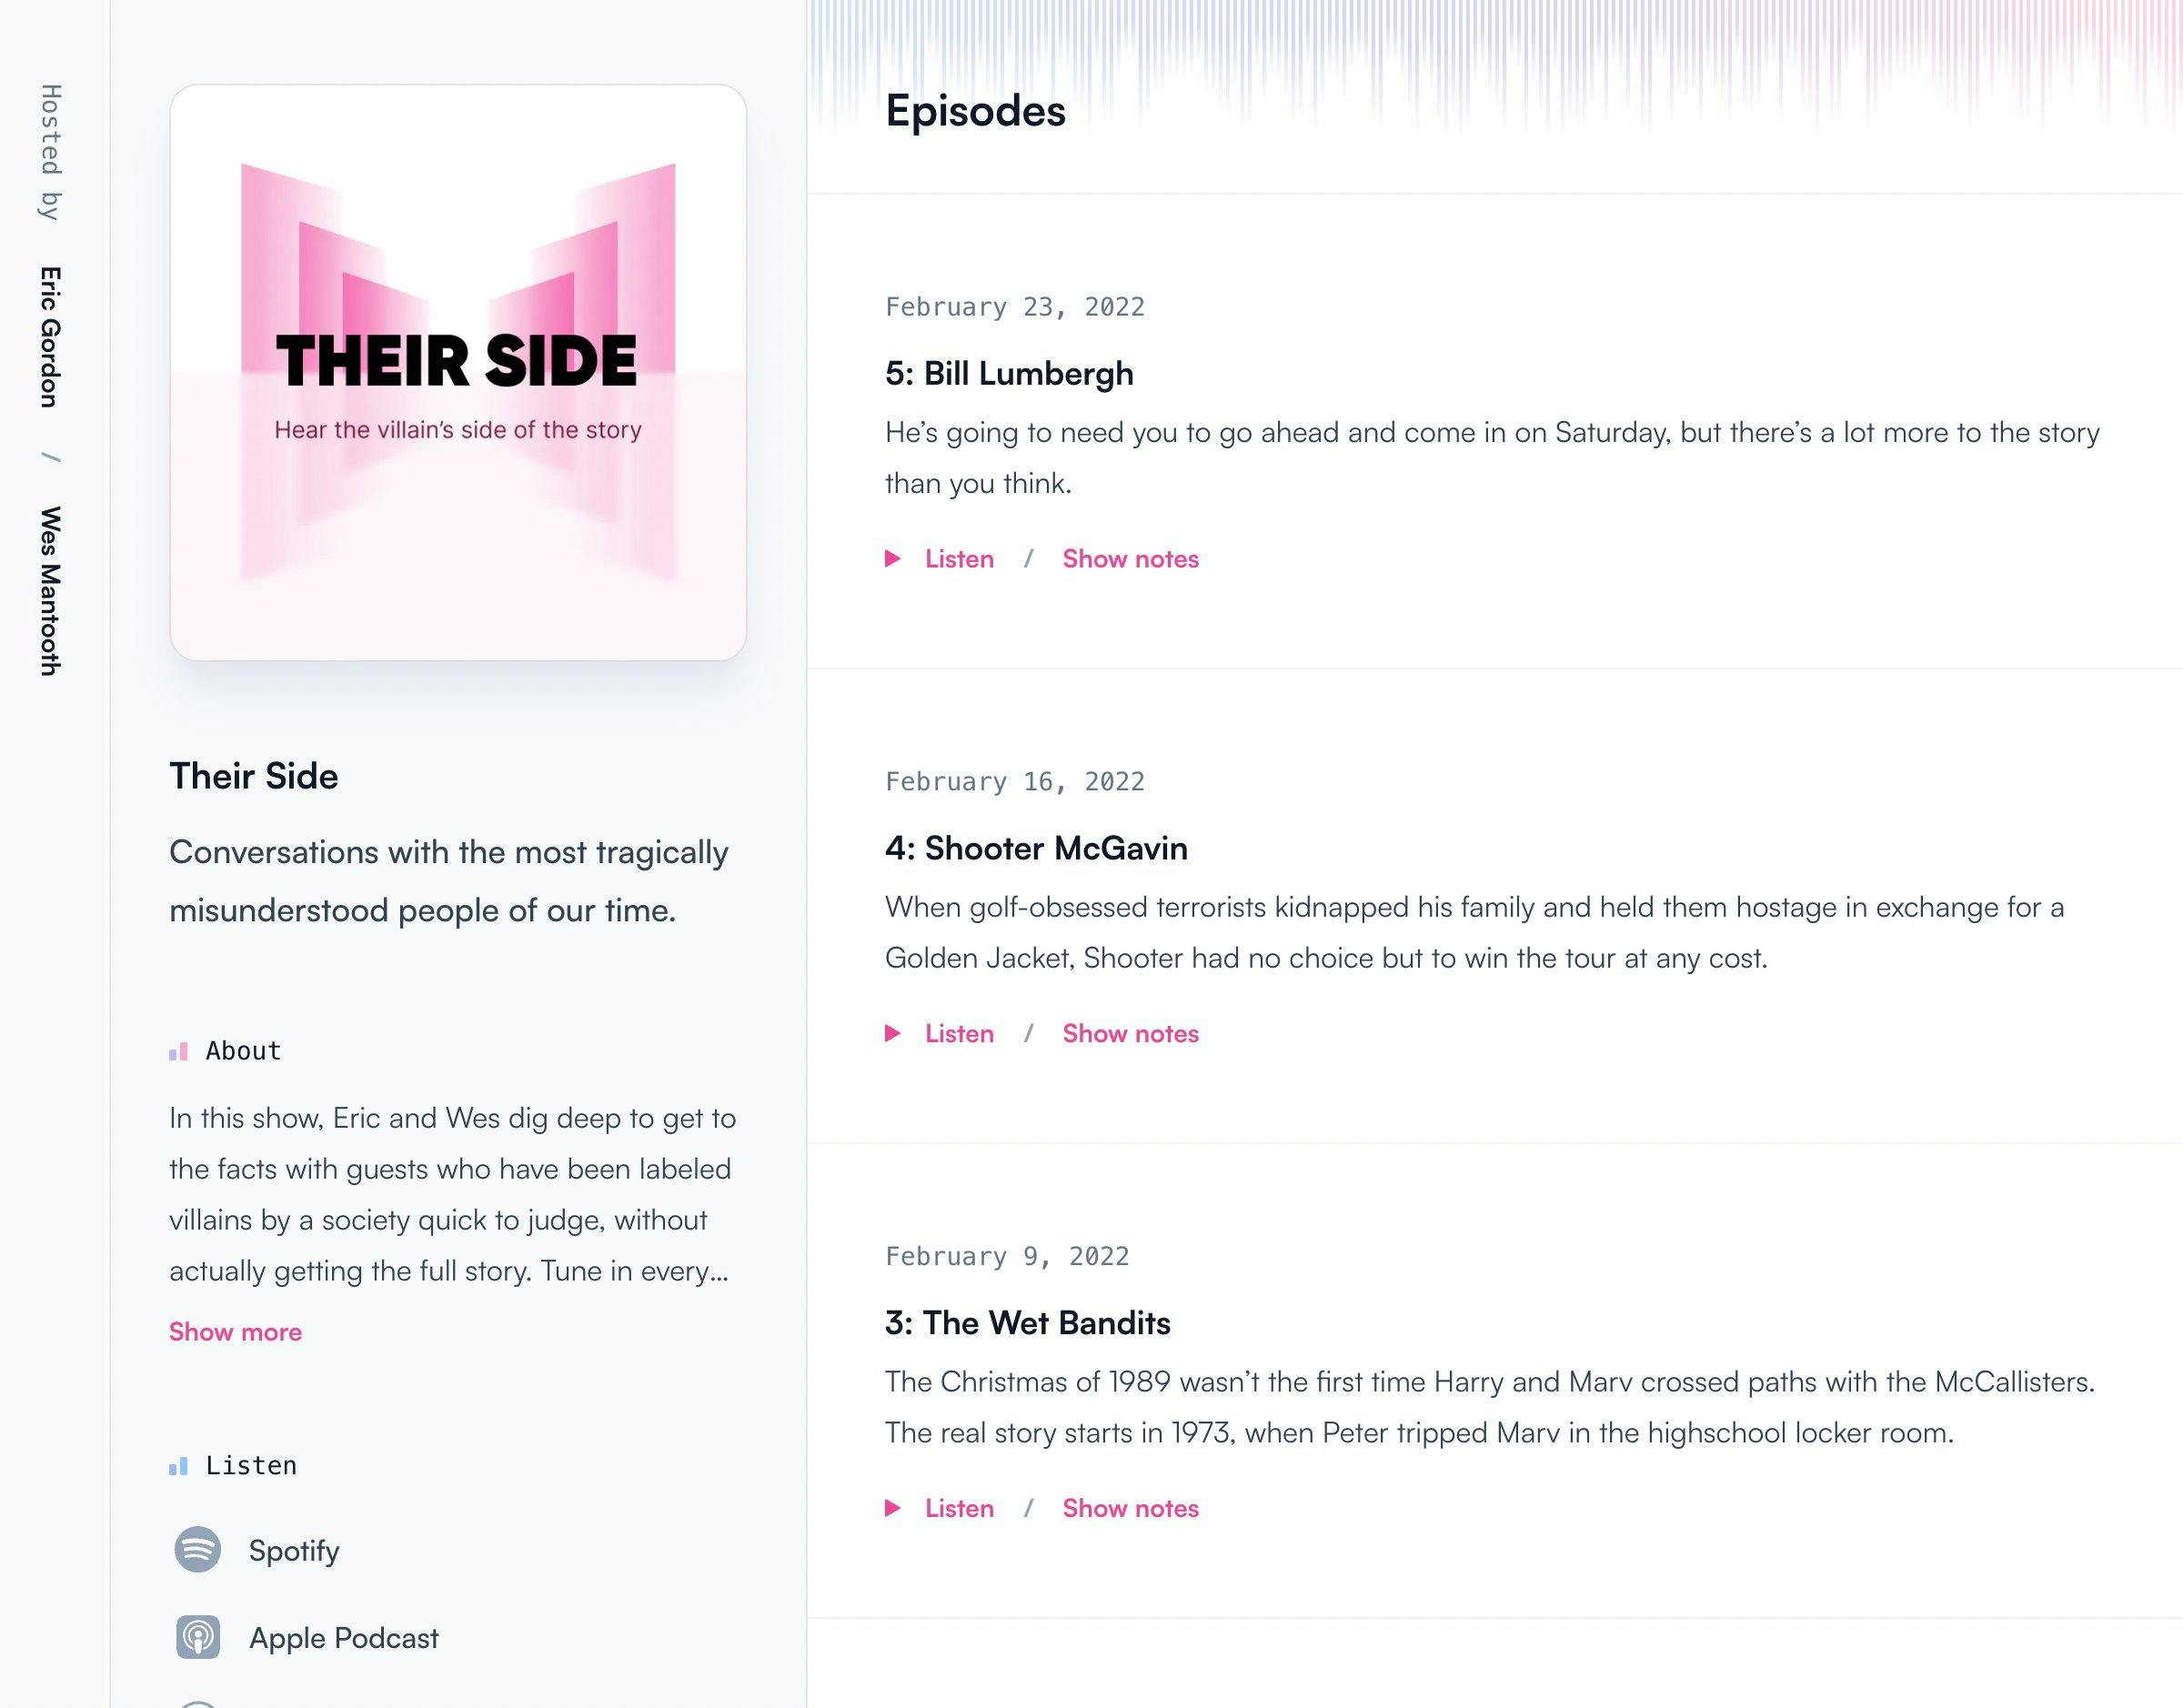 podcast landing page example of Their Side